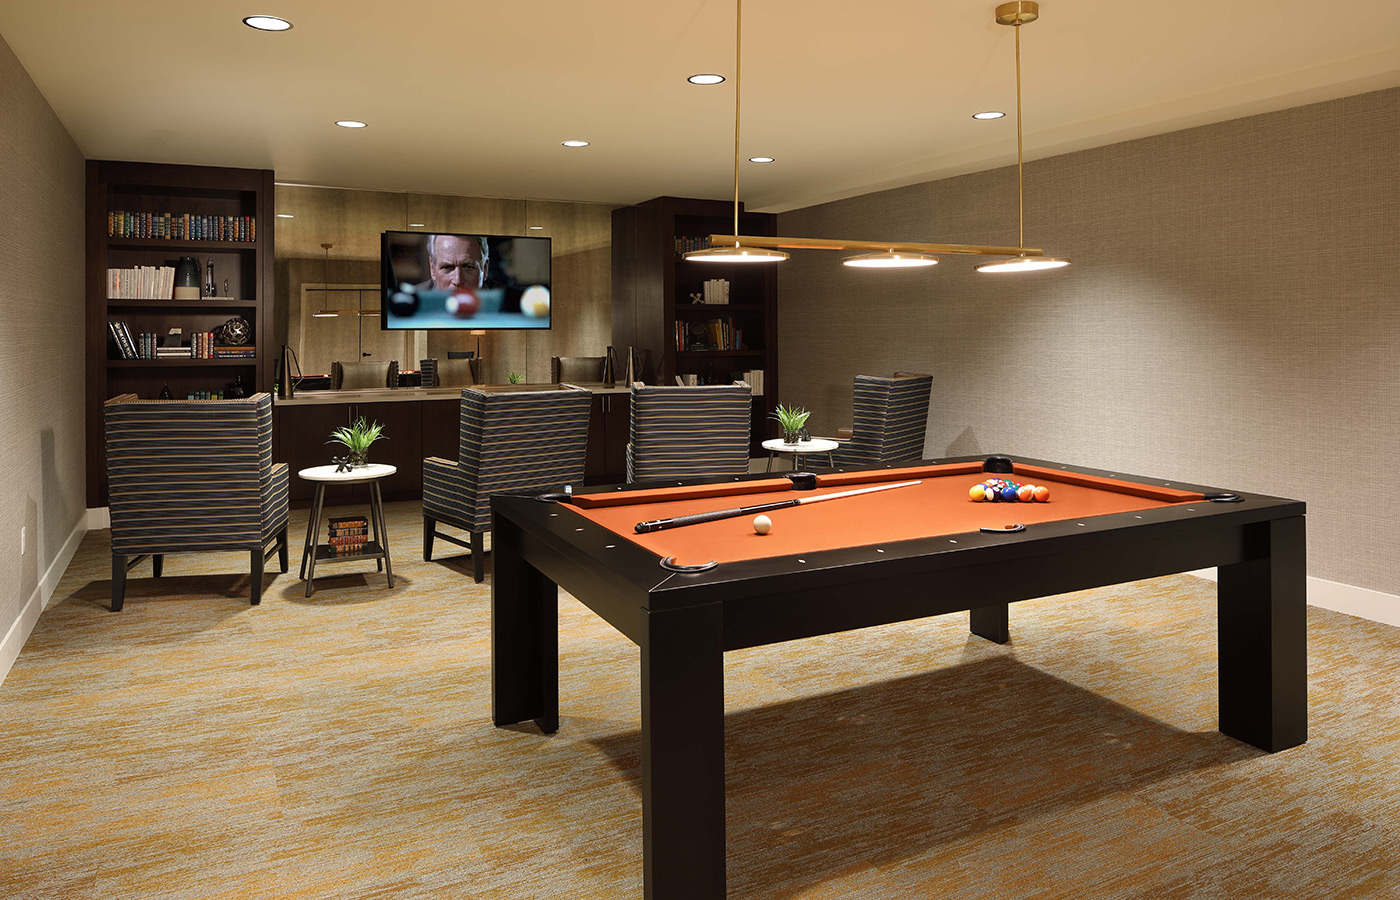 An activity room with a pool table.